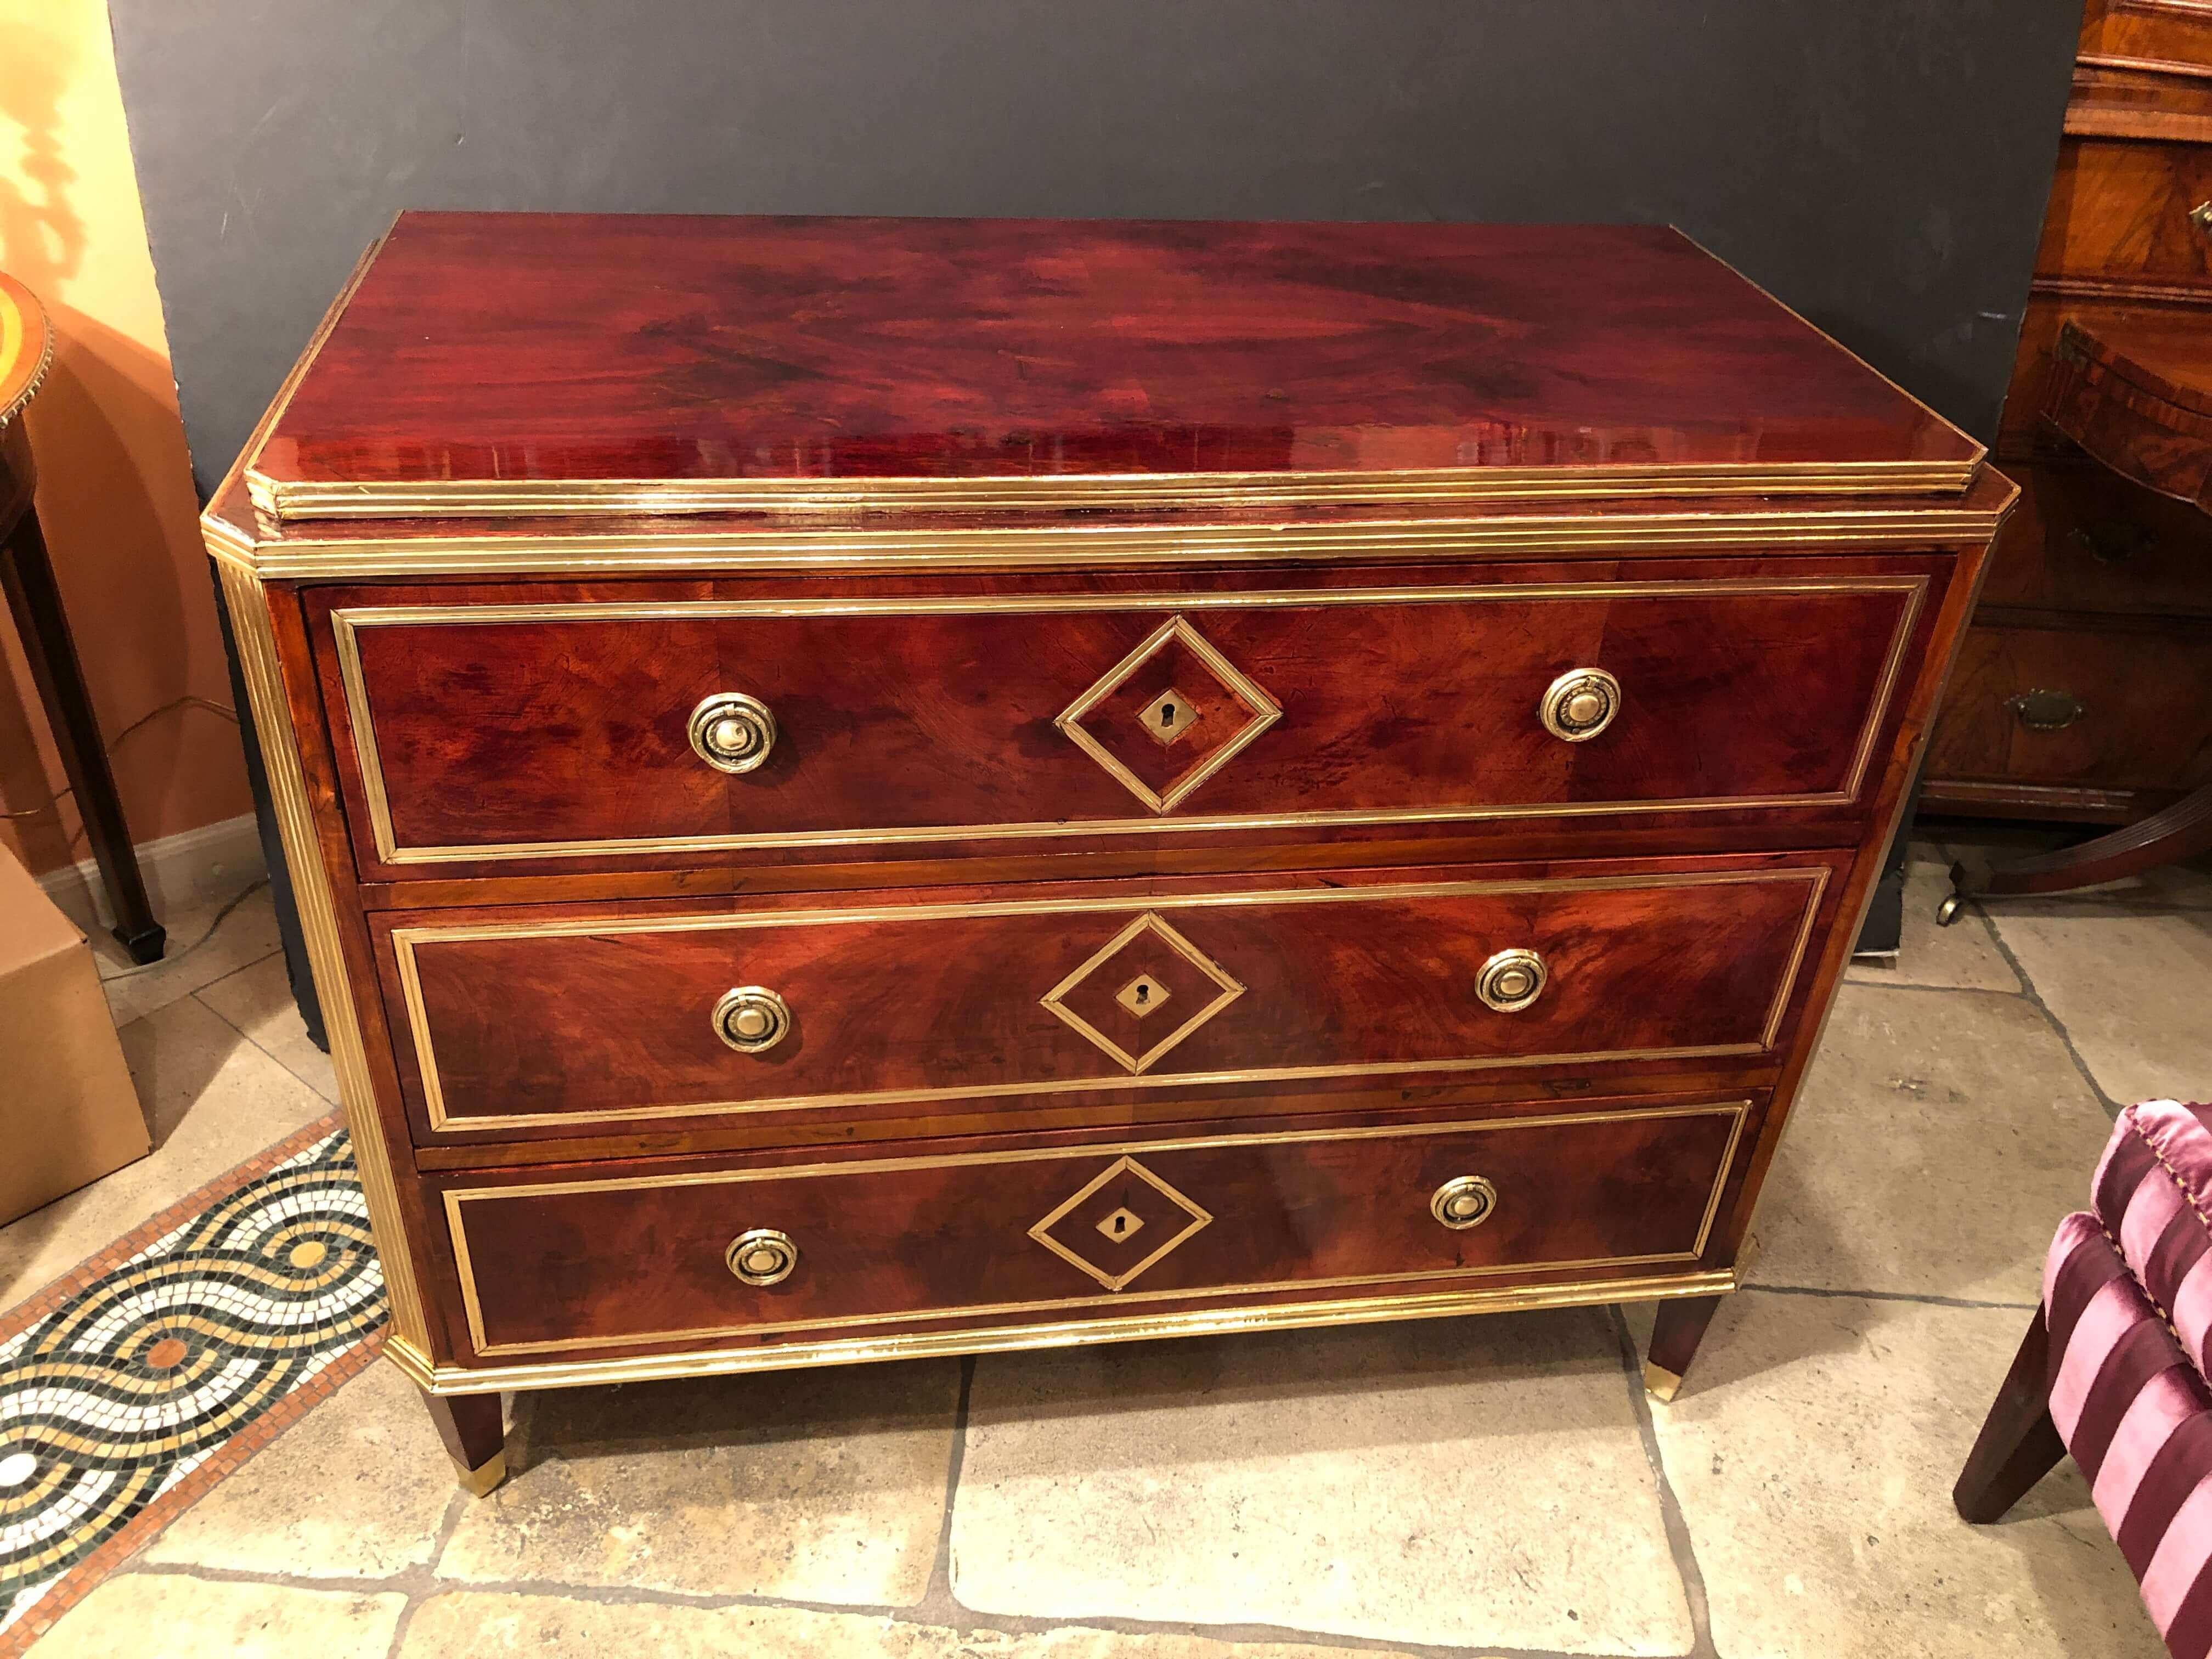 A large Russian neoclassic mahogany three-drawer commode with brass trim and mounts, with diamond motif, canted corners and raised on square tapered legs.